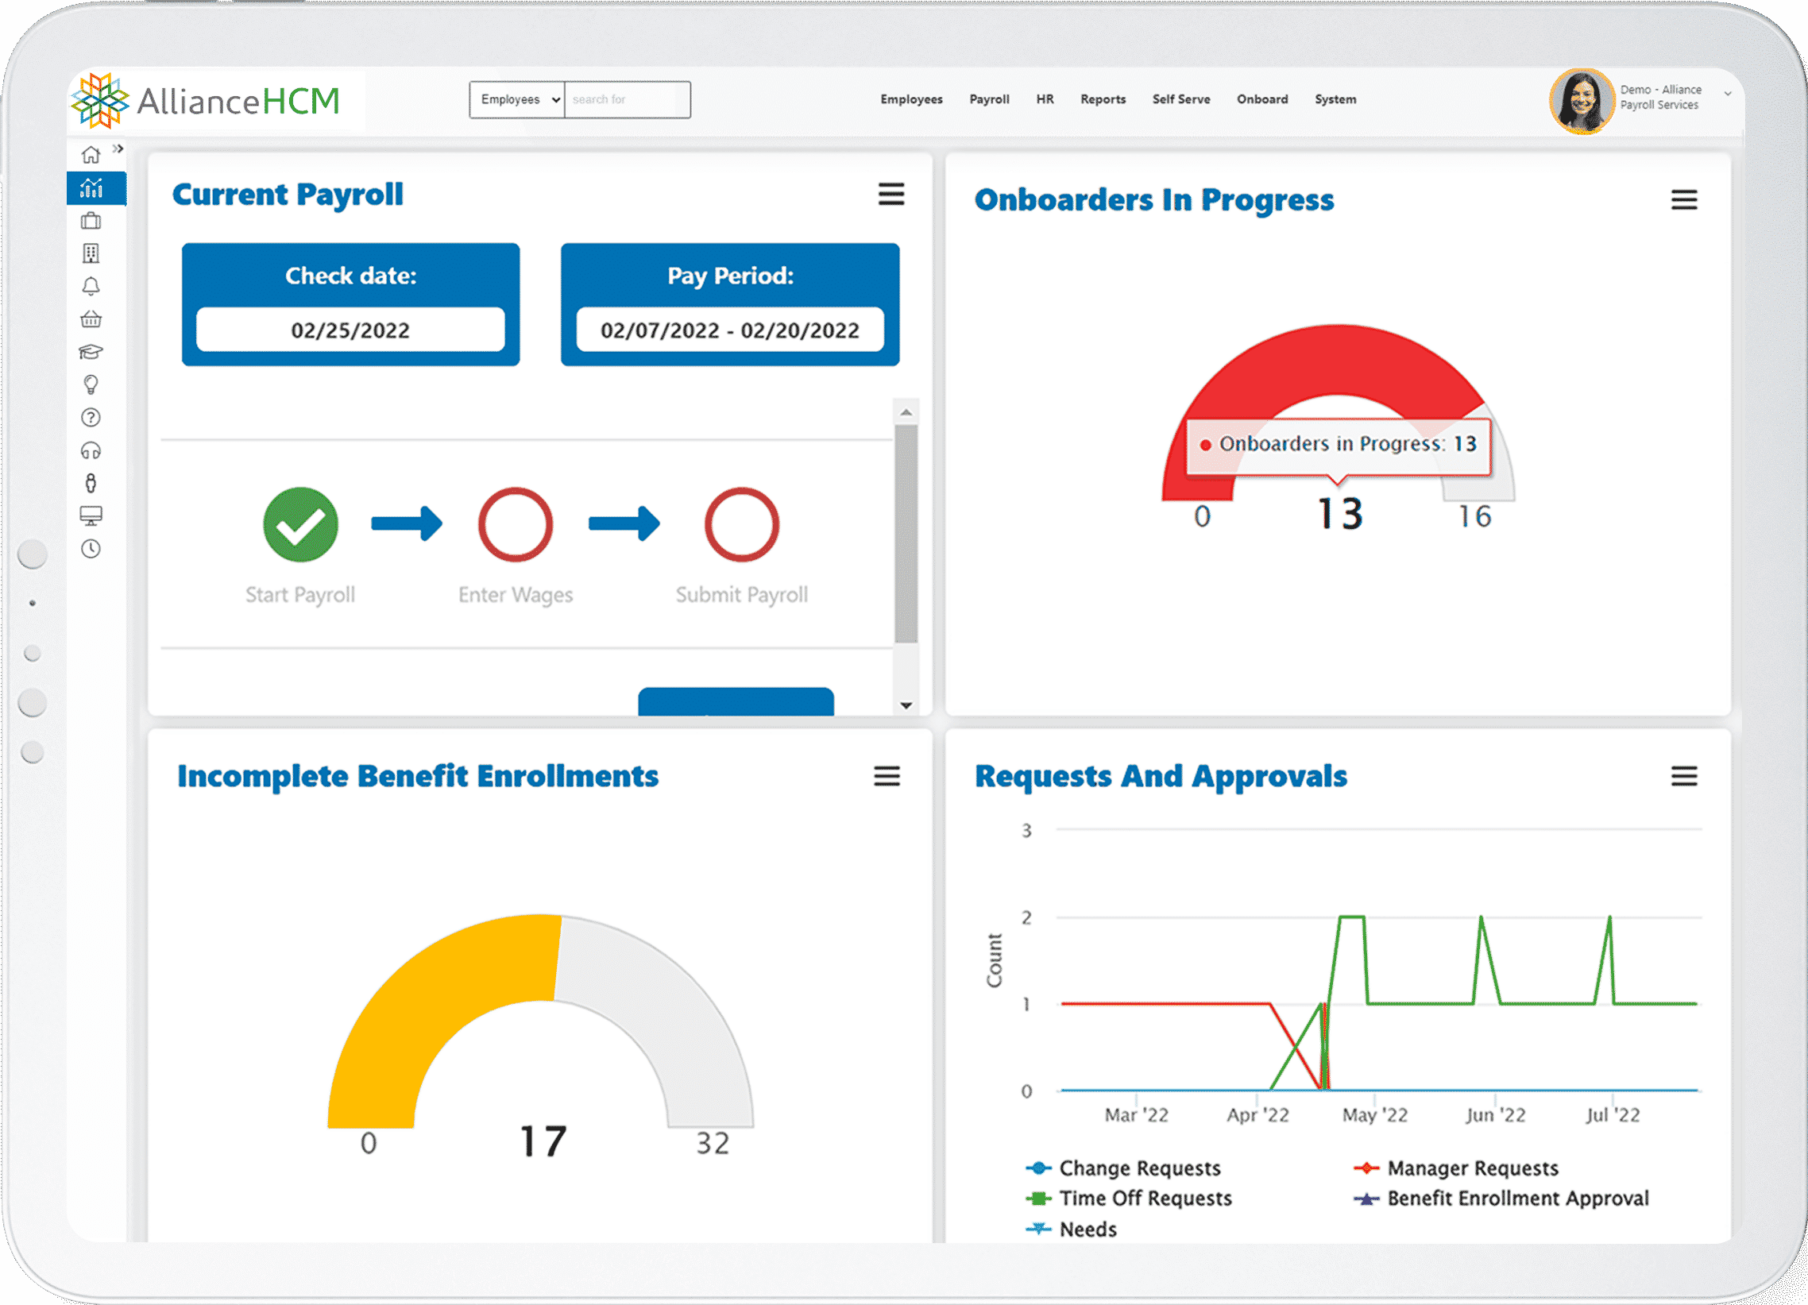 AllianceHCM Customizable HR Dashboard and reporting solutions